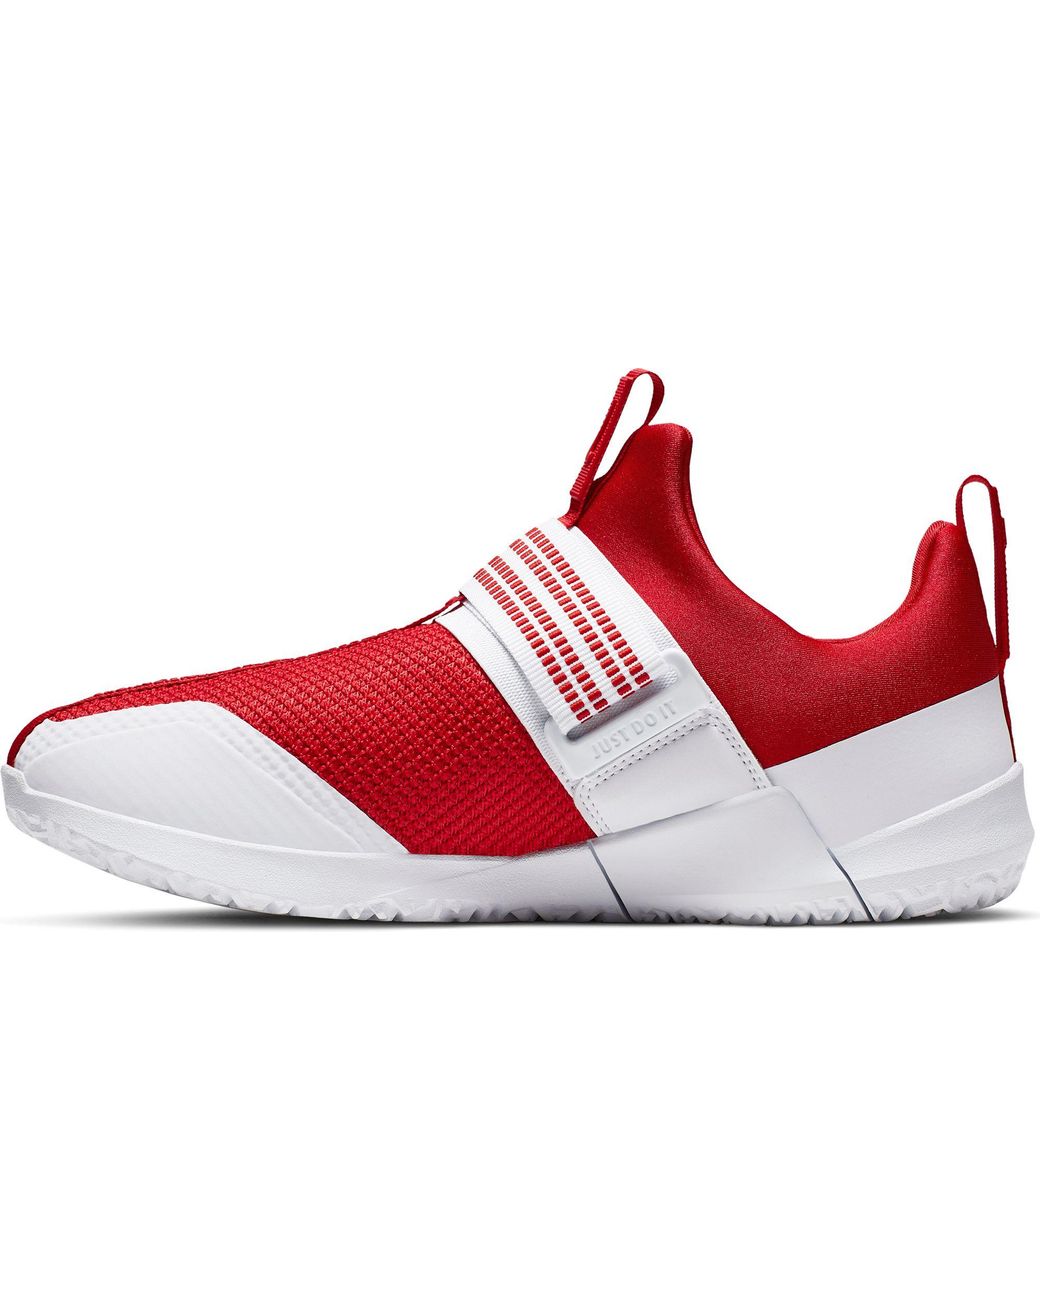 Nike Metcon Sport Training Shoes in University Red/White (Red) for Men |  Lyst